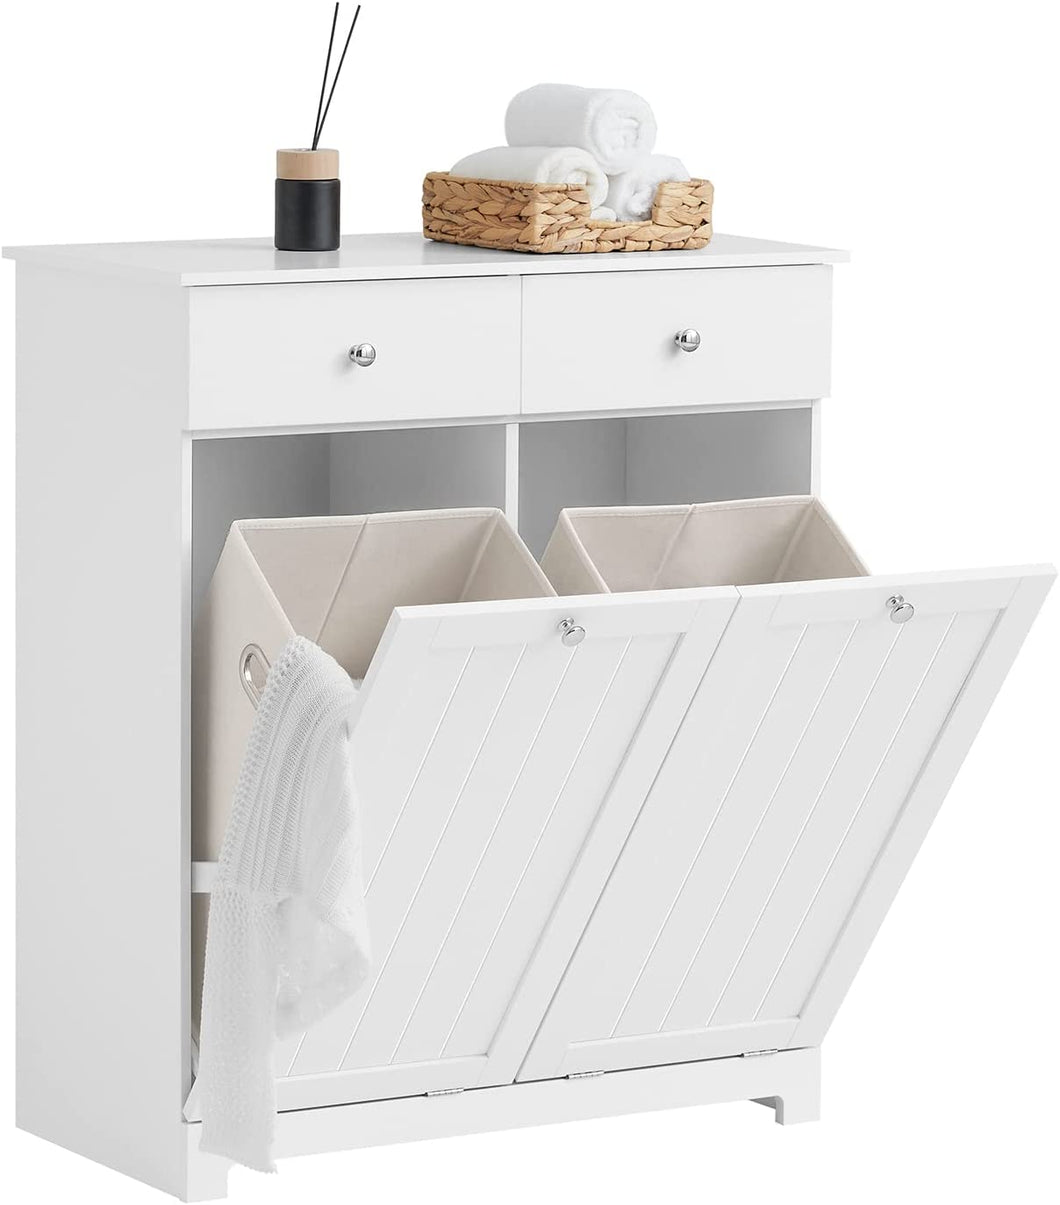 BZR33-W, 2 Drawers 2 Doors Laundry Cabinet Laundry Chest with 2 Removable Laundry Baskets, Bathroom Cabinet